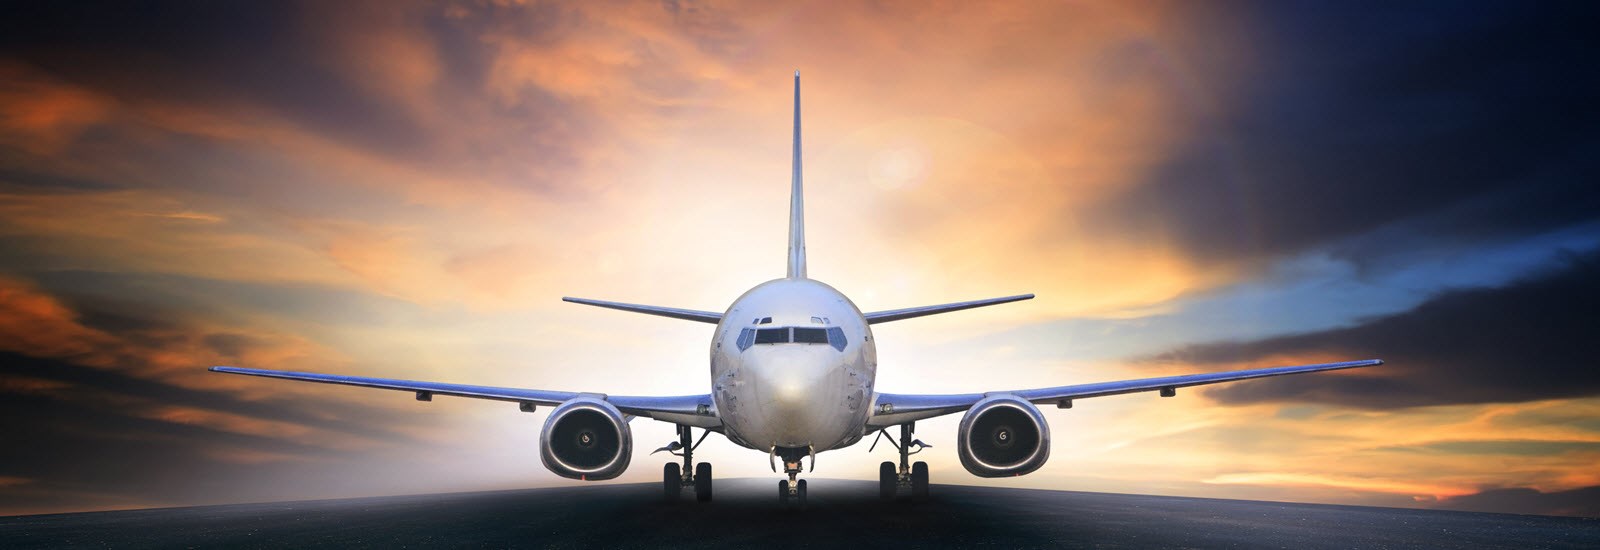 Global Aviation Services